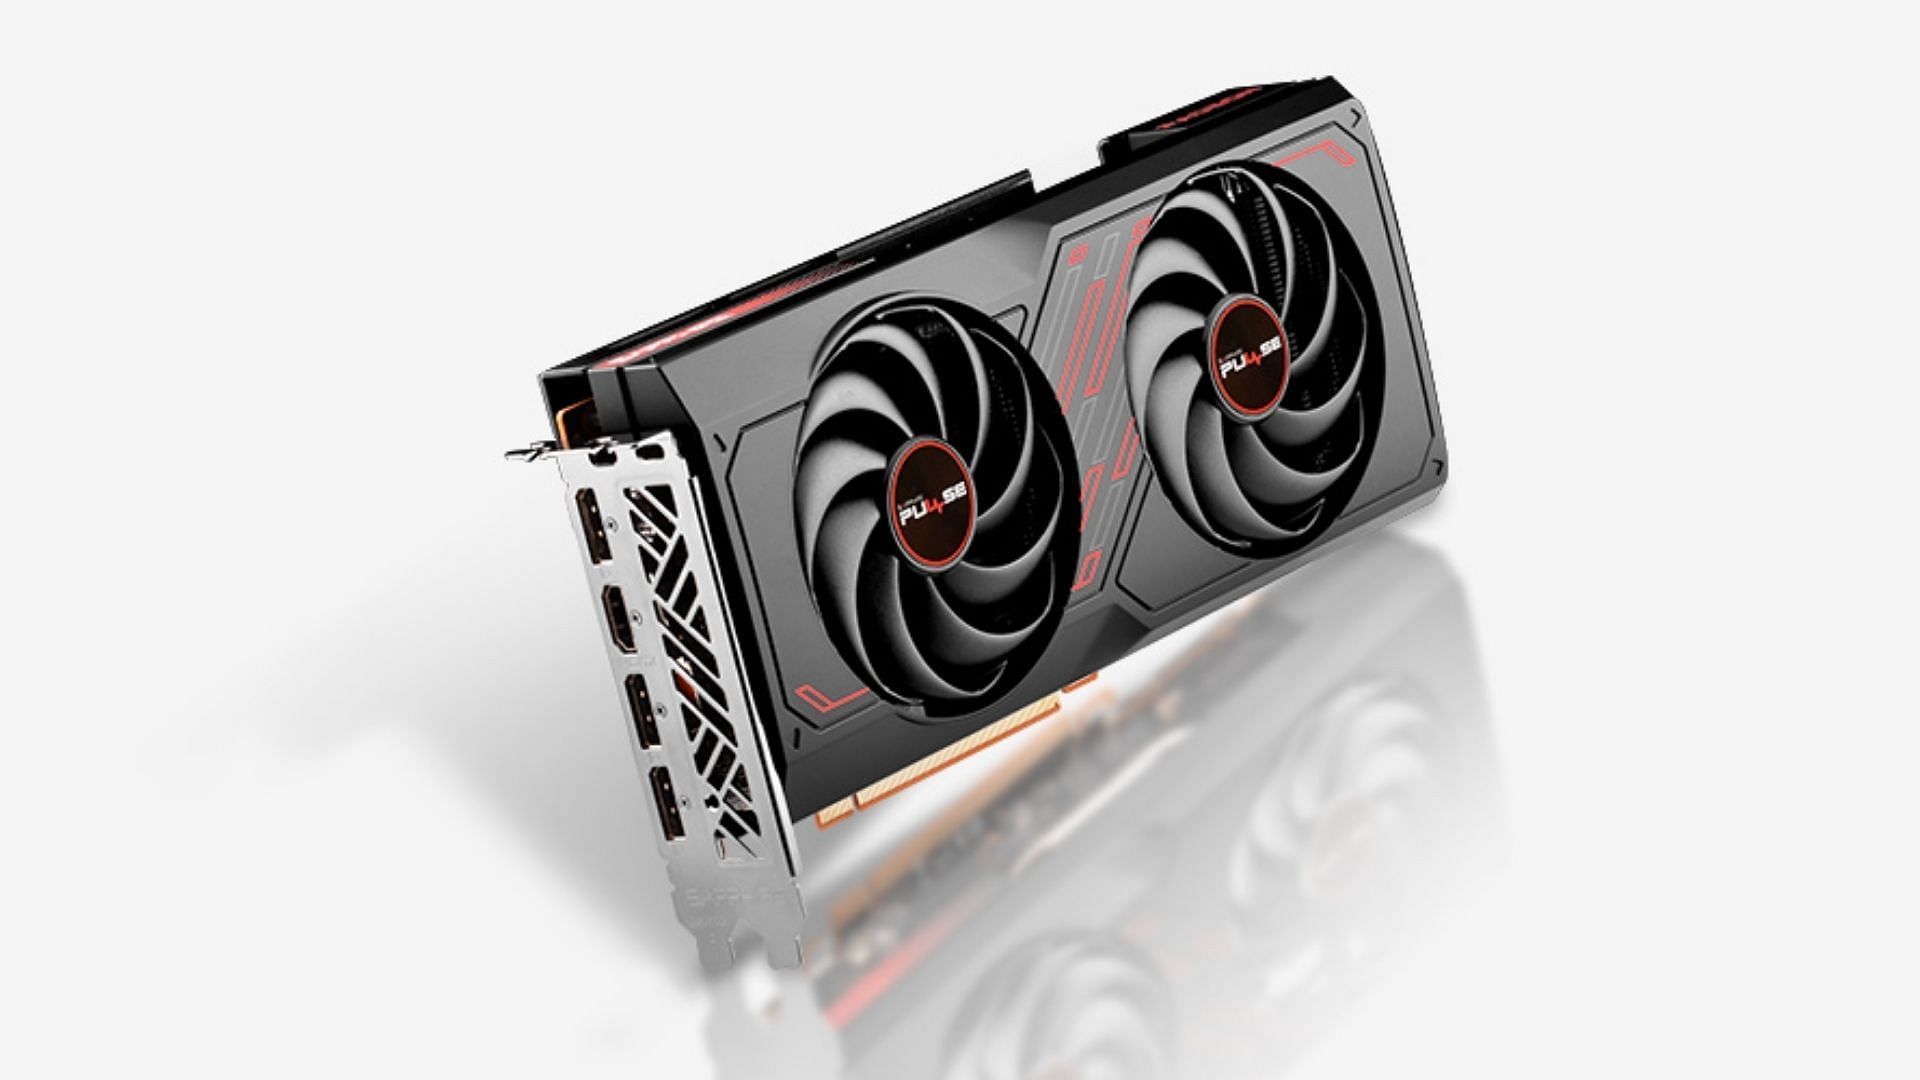 The 7800 XT is an excellent card for 1440p gaming (Image via Sapphire)